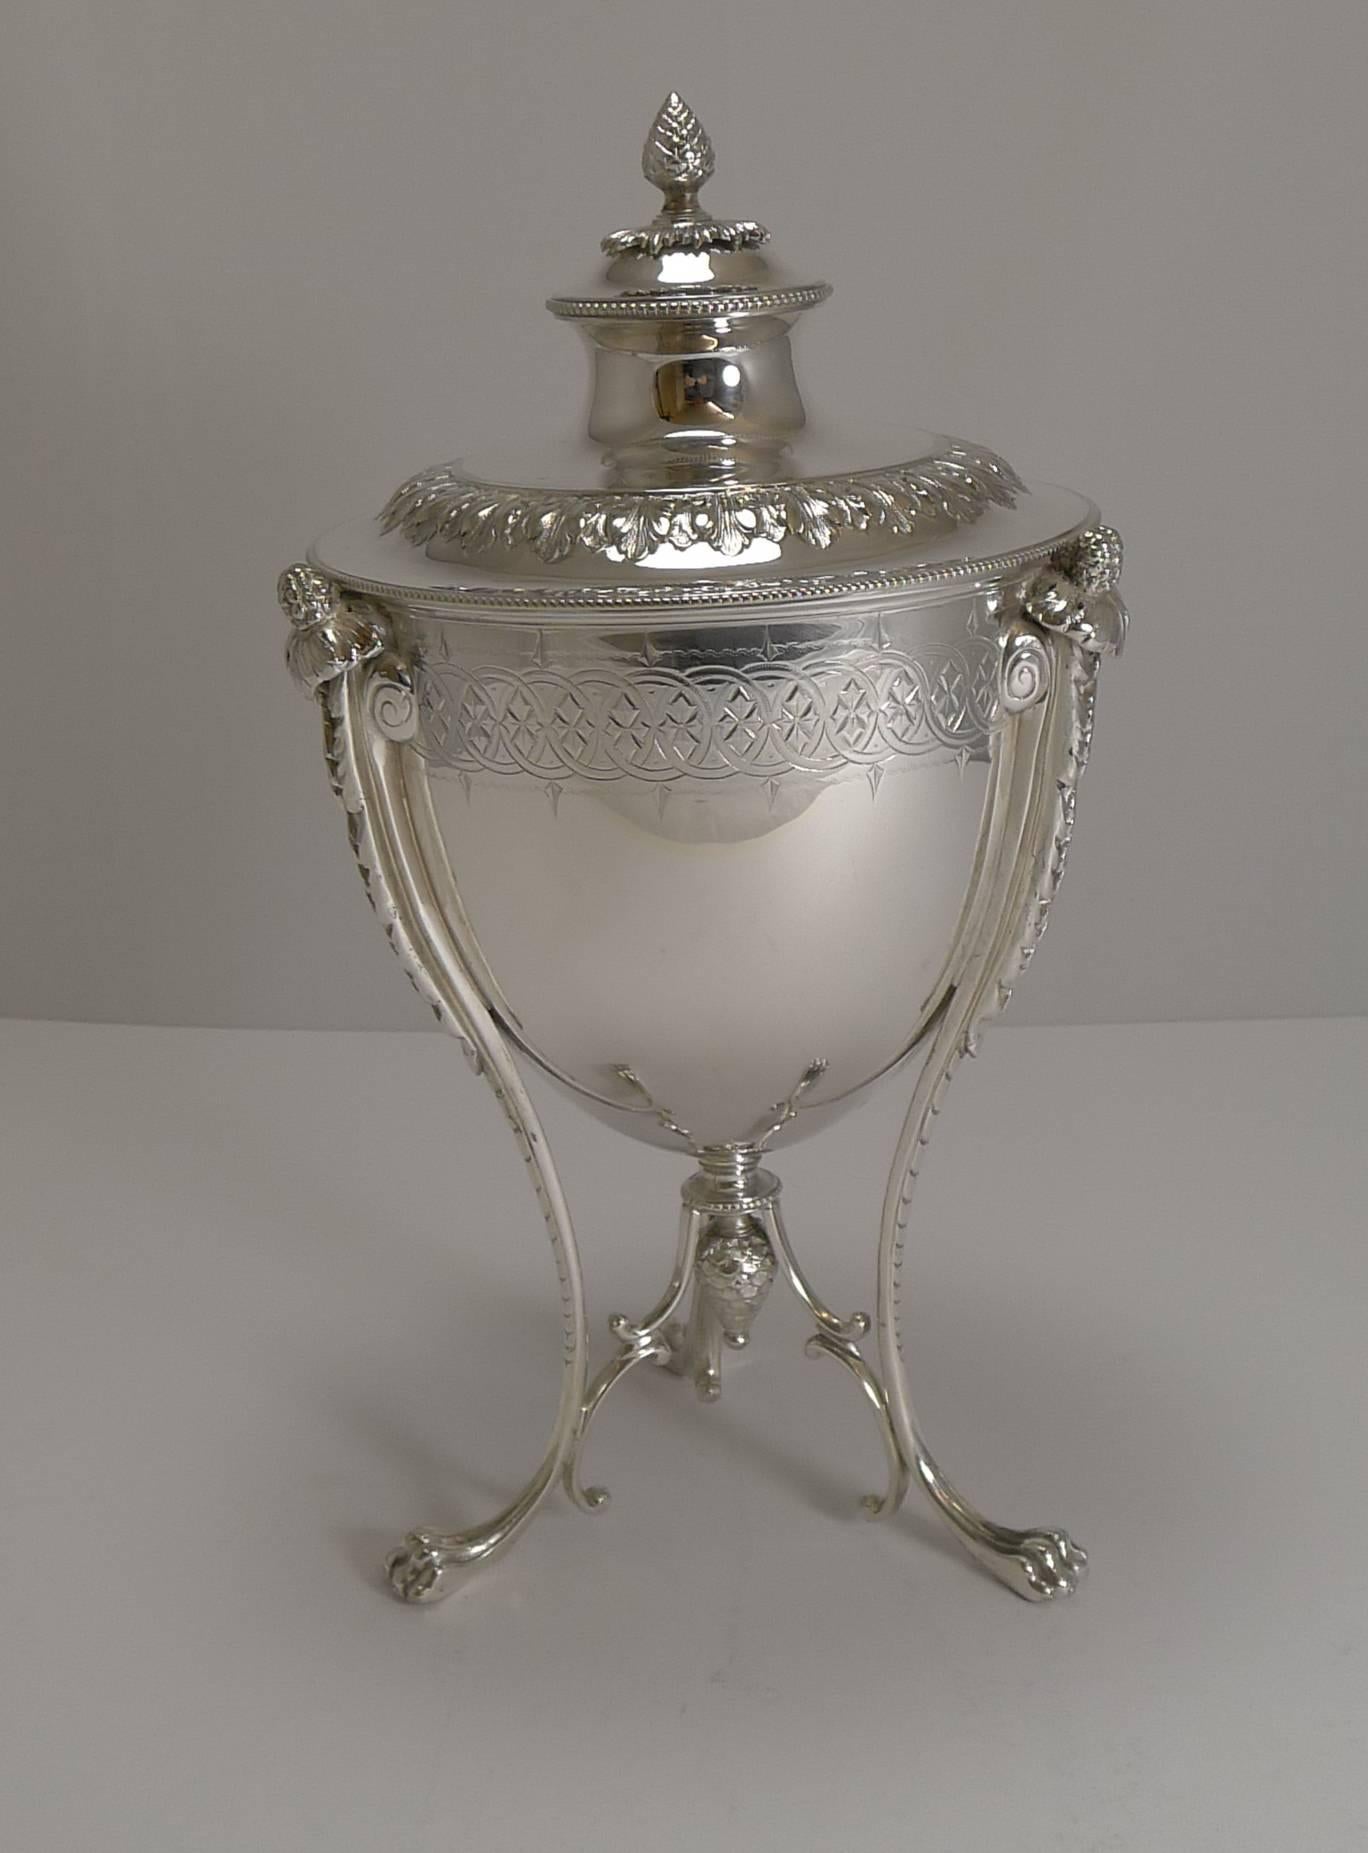 An absolutely stunning and most unusual Victorian biscuit box made in silver plate by the well renowned silversmith, Martin Hall & Co.

The three elegant tall legs terminate in Lion's paw feet and lead upwards to a floral and foliate terminal to